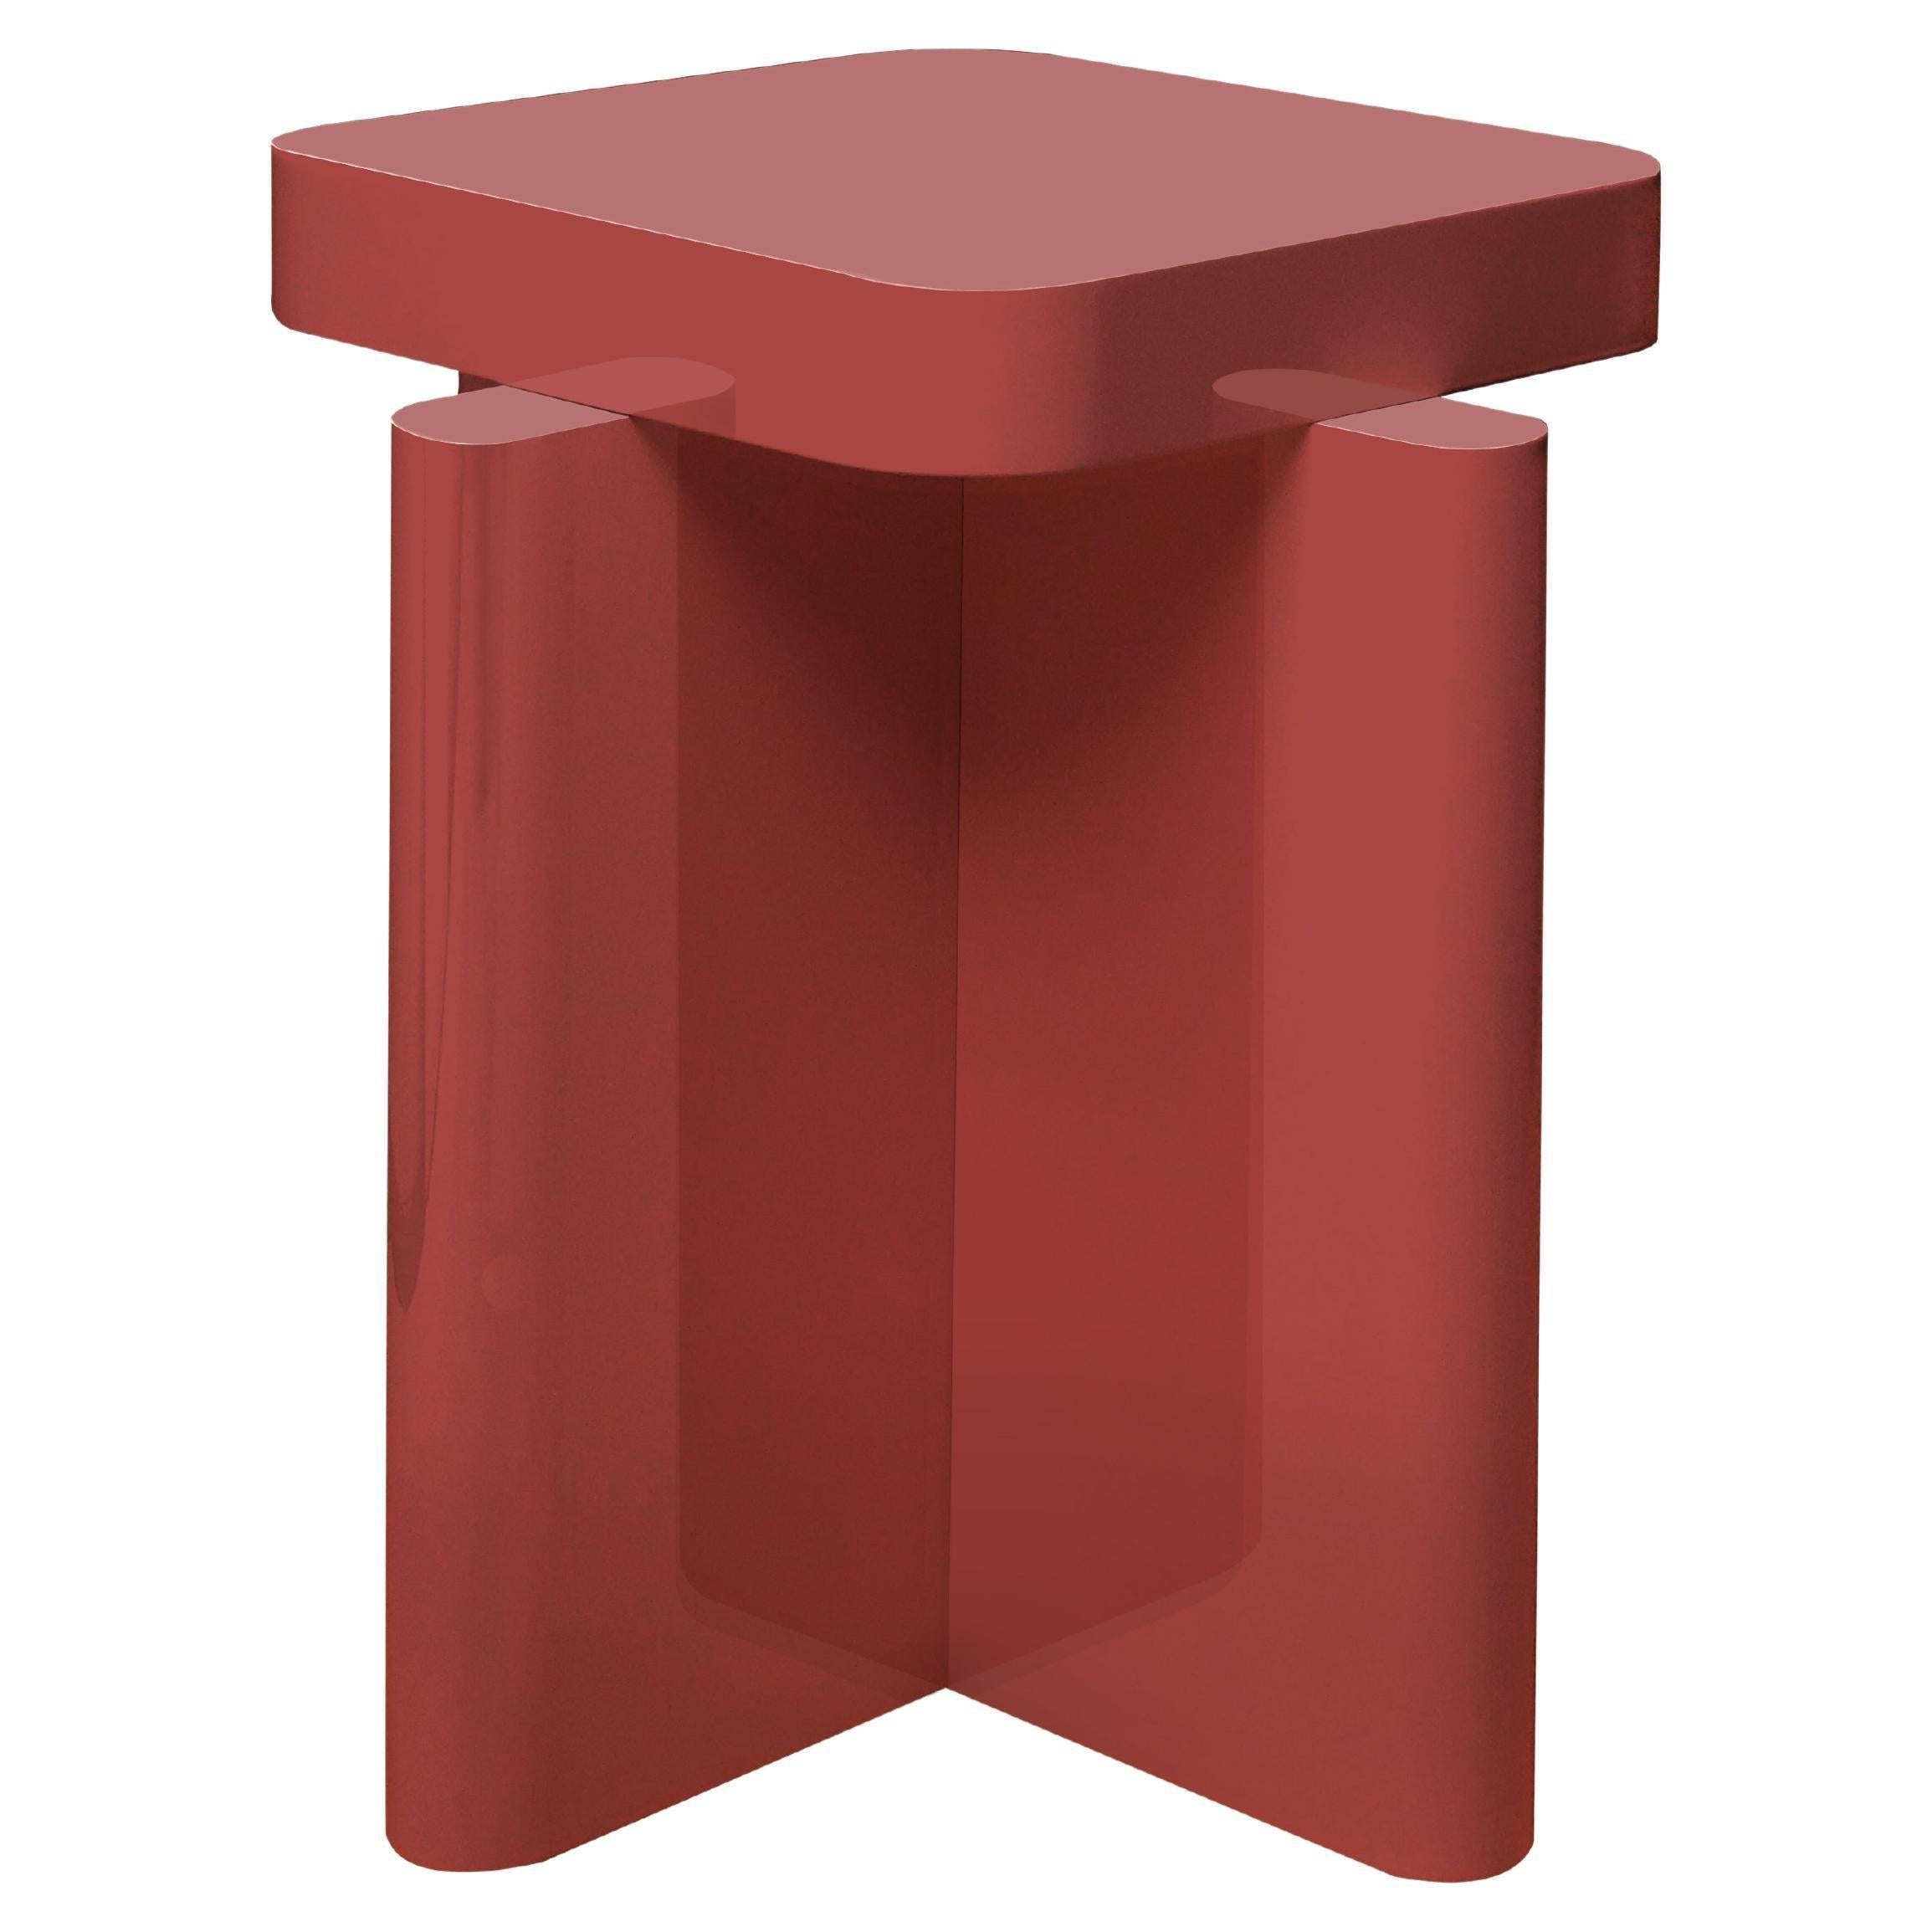 Spina stool by Cara Davide
Dimensions: D 40 x W 40 x H 45 cm 
Materials: wood, Lacquered MDF. 
Also available in colors: bordeaux, caramel, dusty red, off-white, and natural wood.


Spina is a collection of lacquered tables and seatings. The